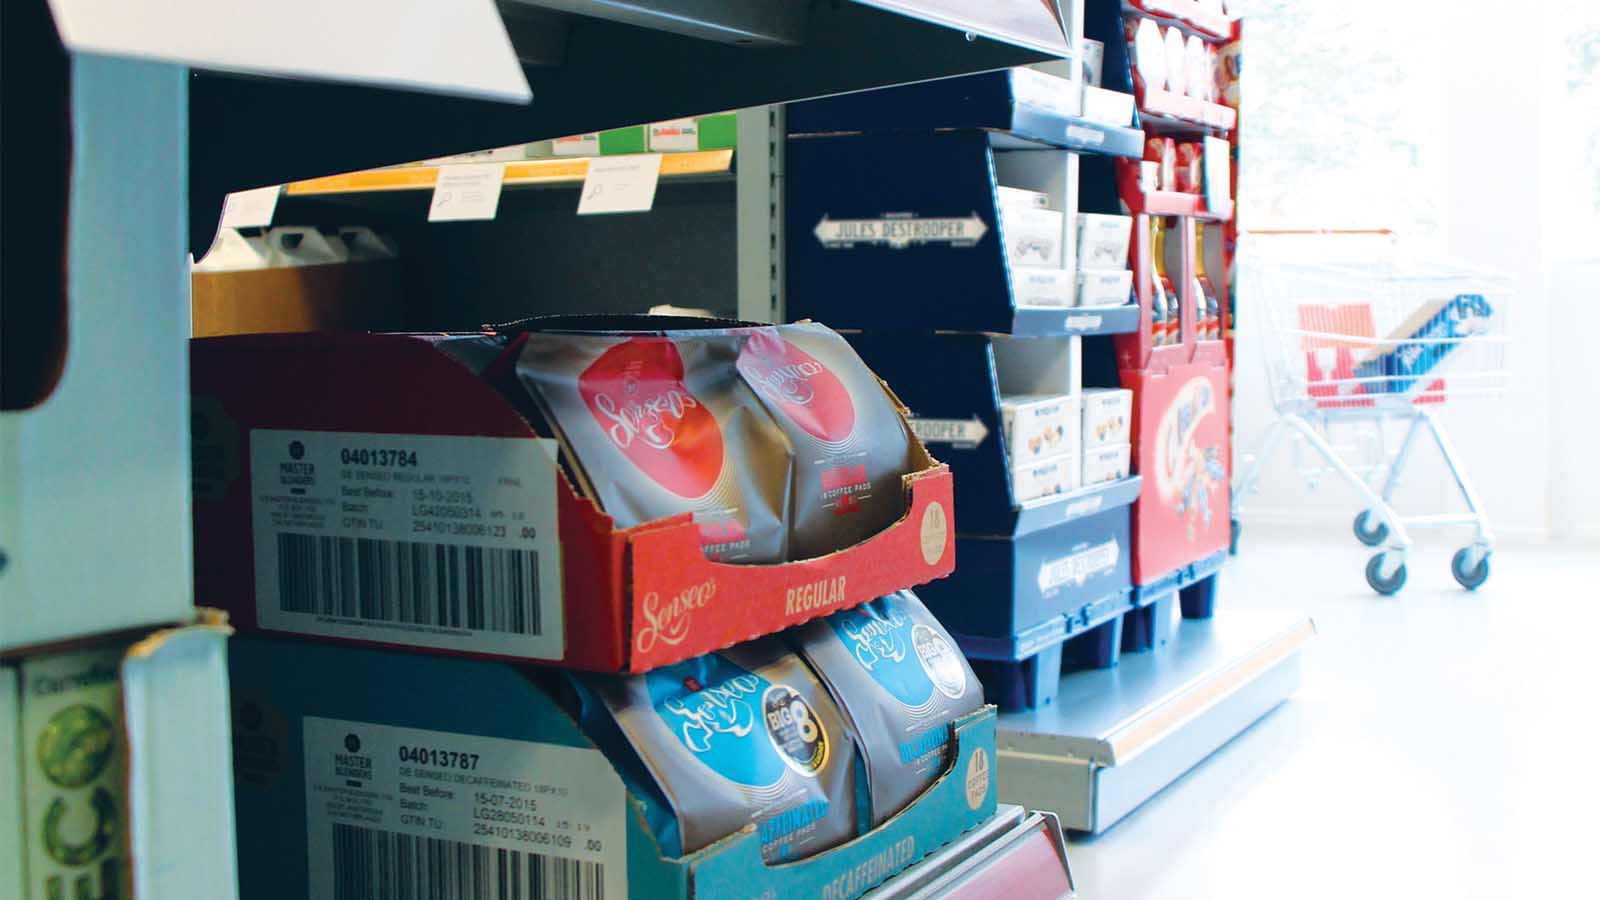 The faster the shelf is replenished, the better your on-shelf availability is. Research by the IGD shows that even 37% of customers will buy another brand if the product they have chosen is not on the shelf.